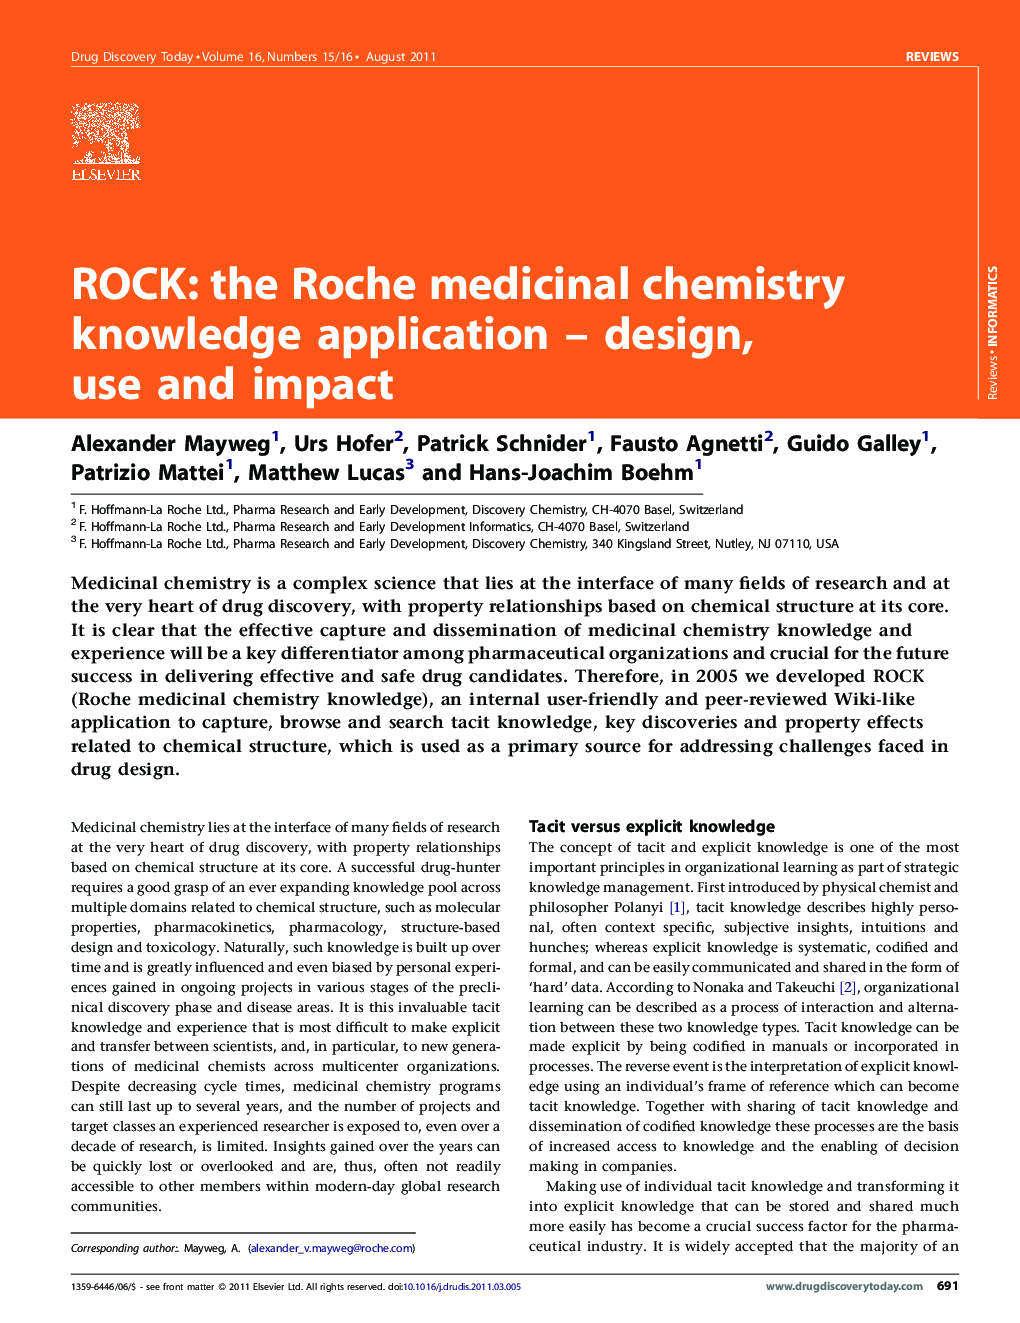 ROCK: the Roche medicinal chemistry knowledge application – design, use and impact